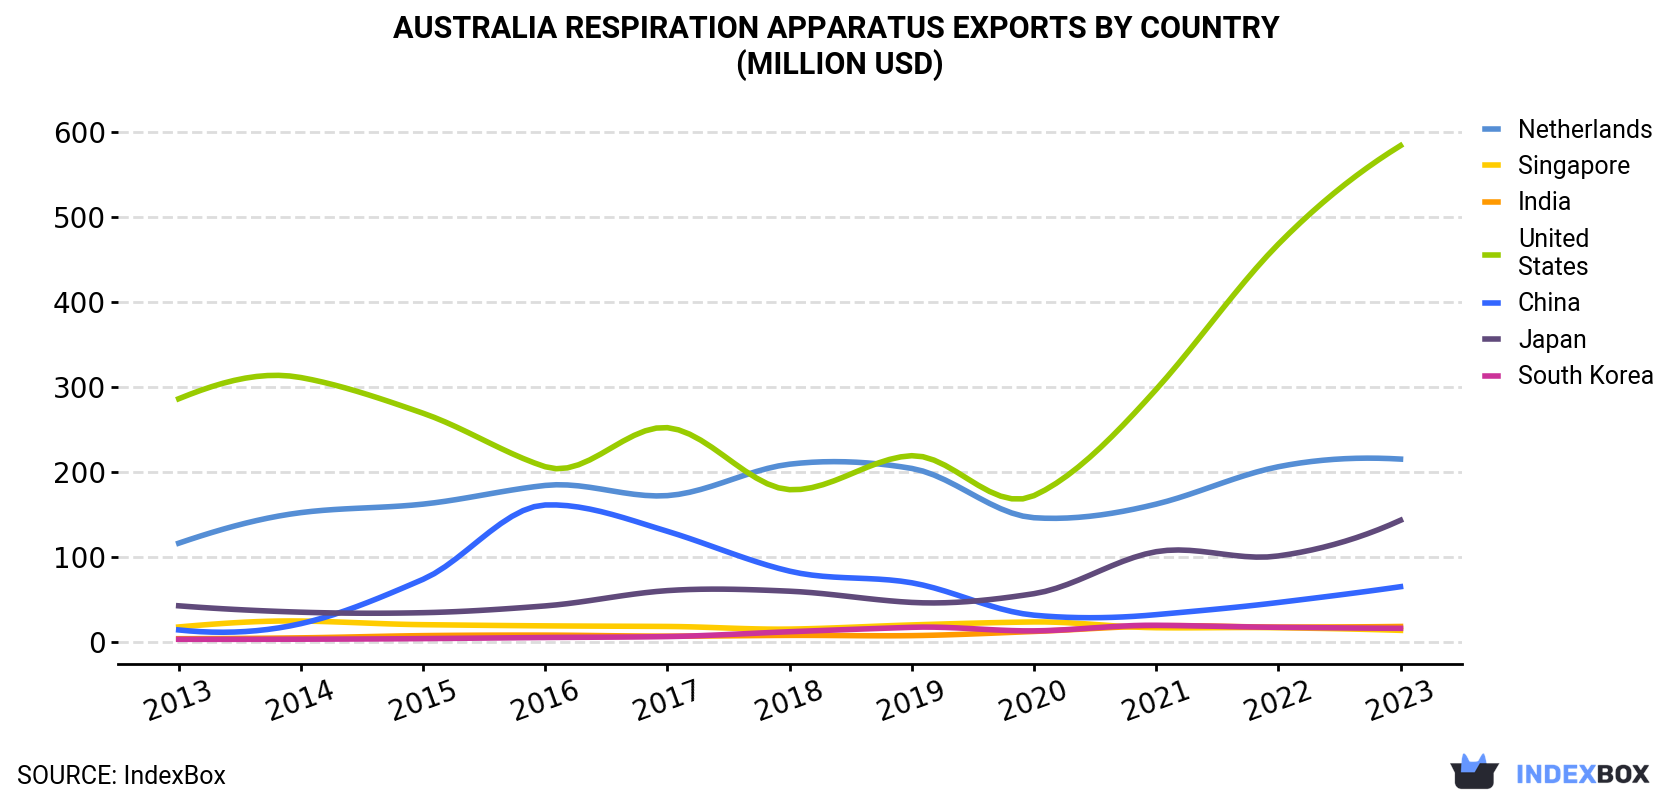 Australia Respiration Apparatus Exports By Country (Million USD)